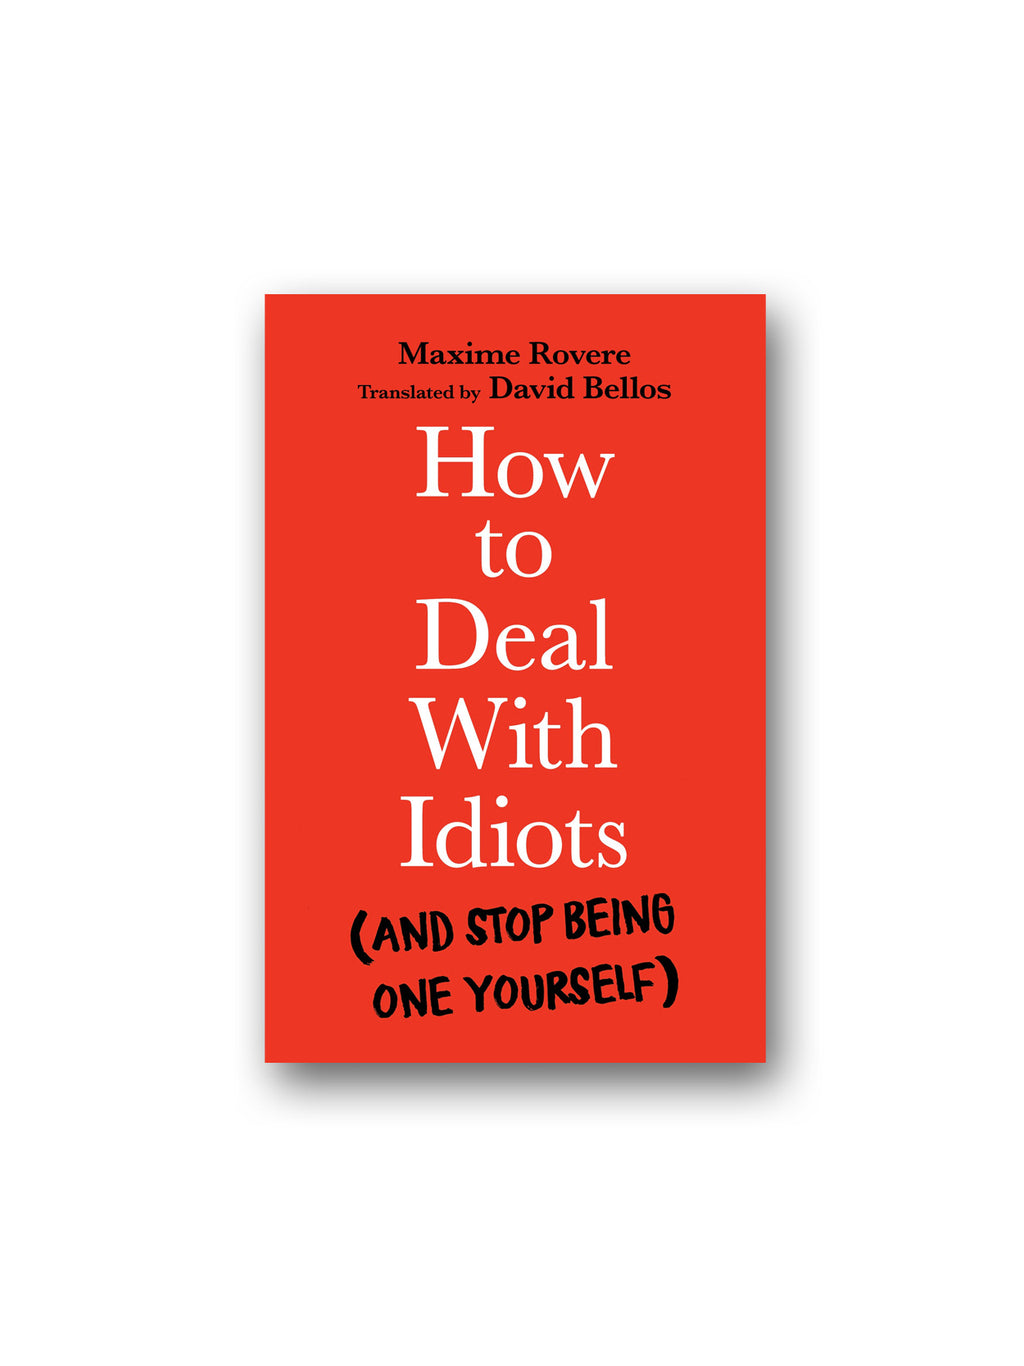 How to Deal With Idiots : (and stop being one yourself)